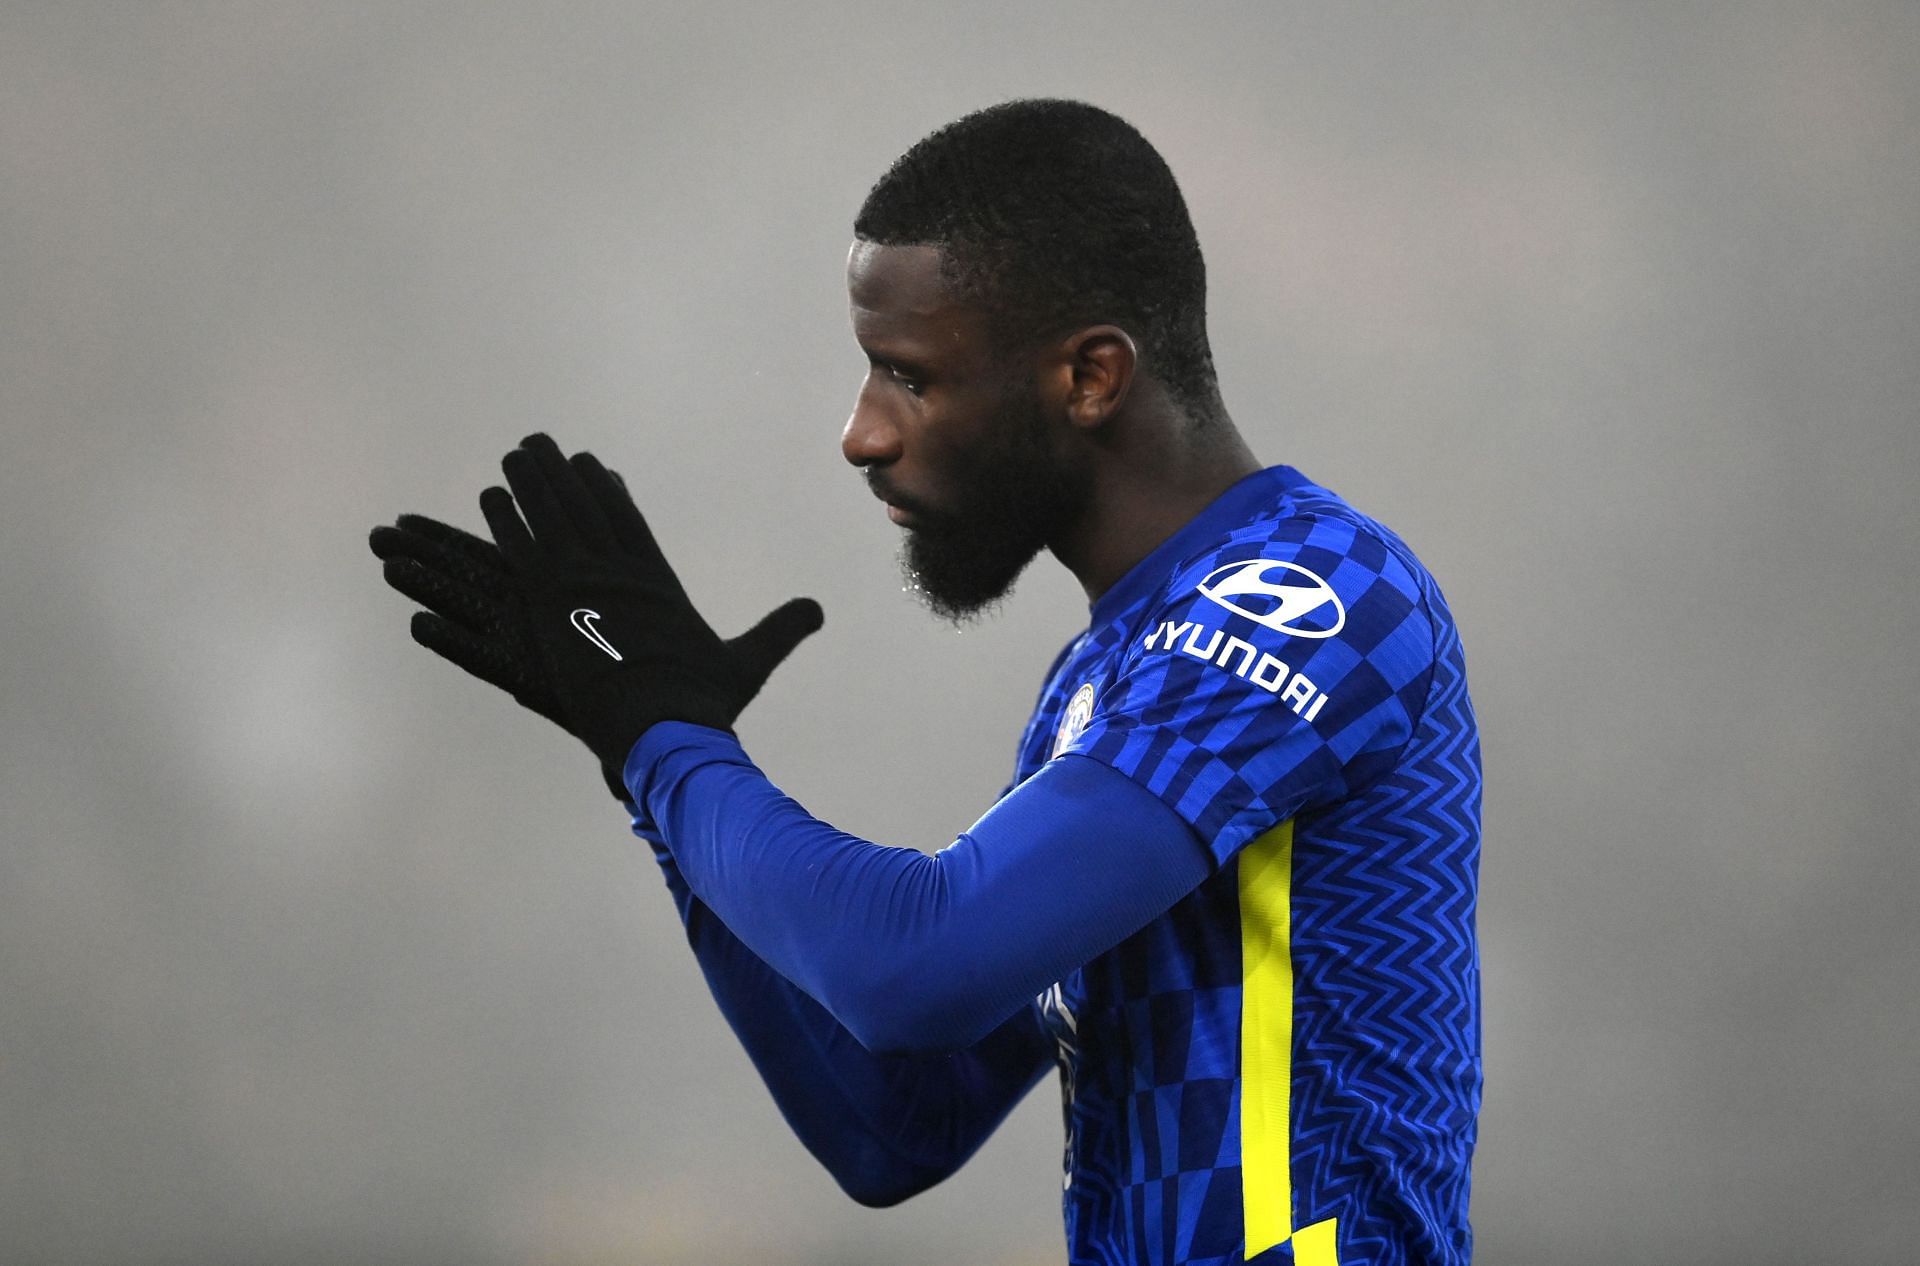 Manchester United are preparing a blockbuster offer to award Antonio Rudiger to leave Chelsea.